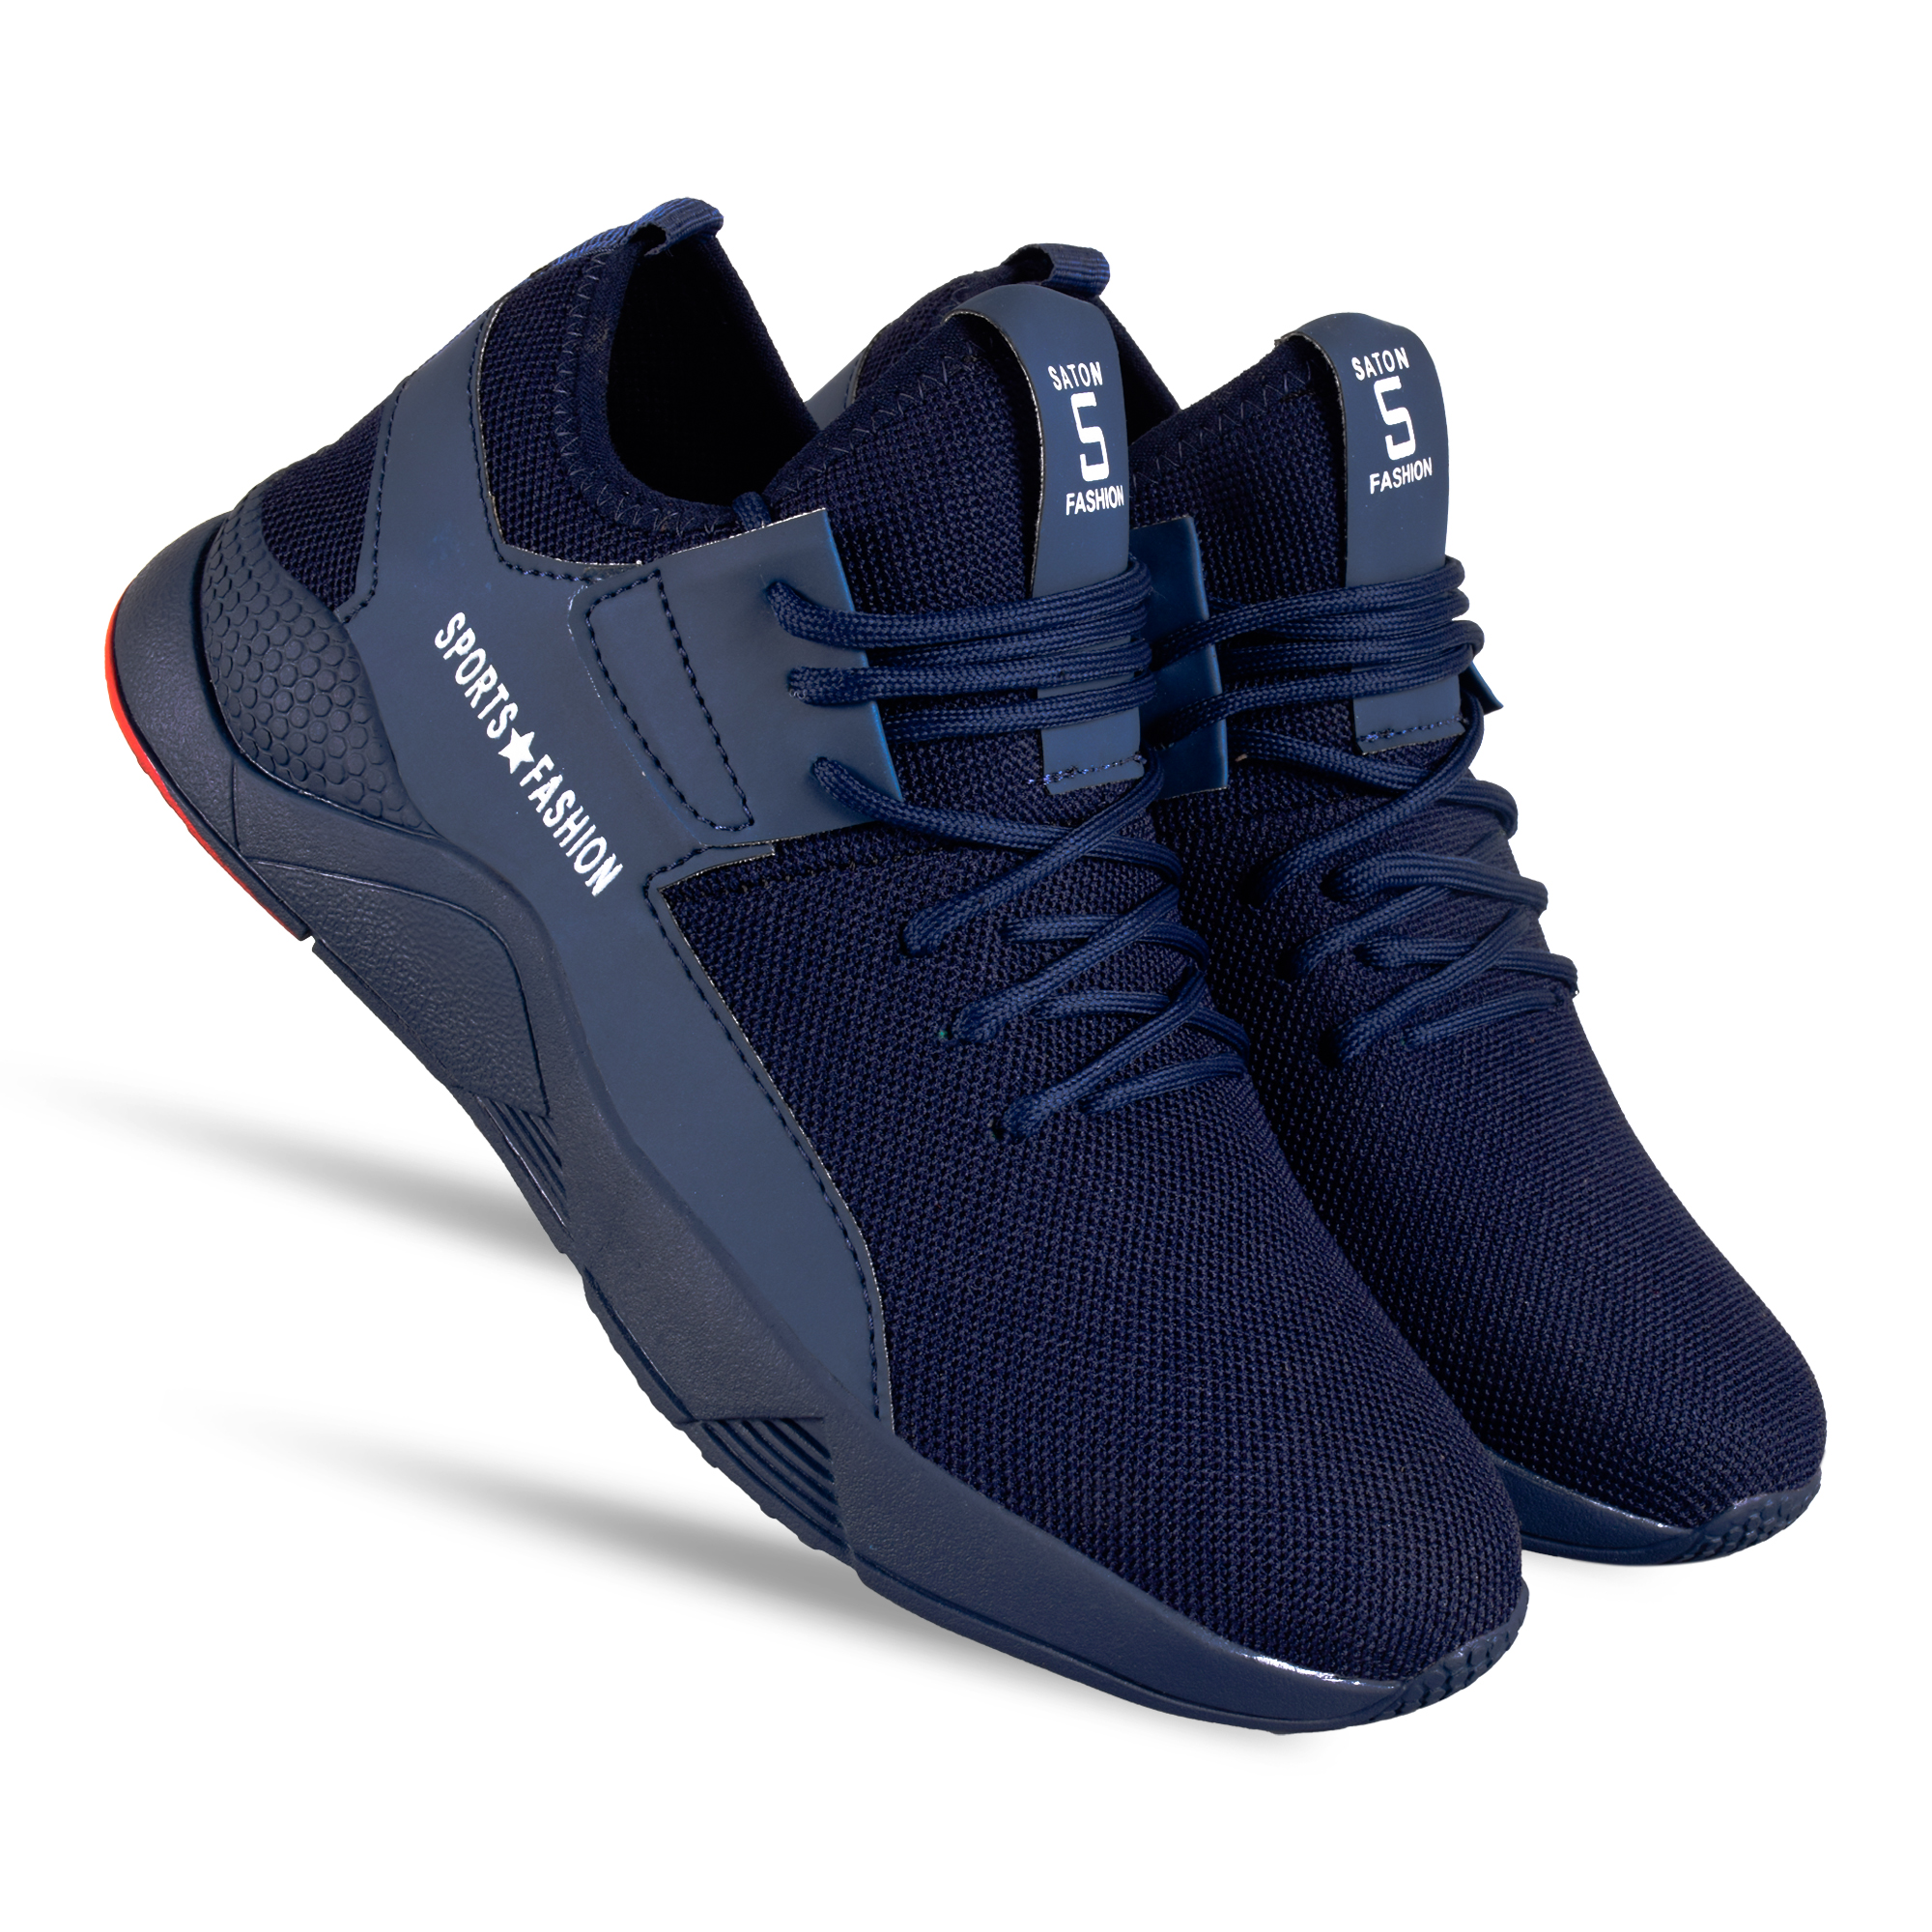 Buy Spain blue fashion casual sports shoes Online @ ₹549 from ShopClues